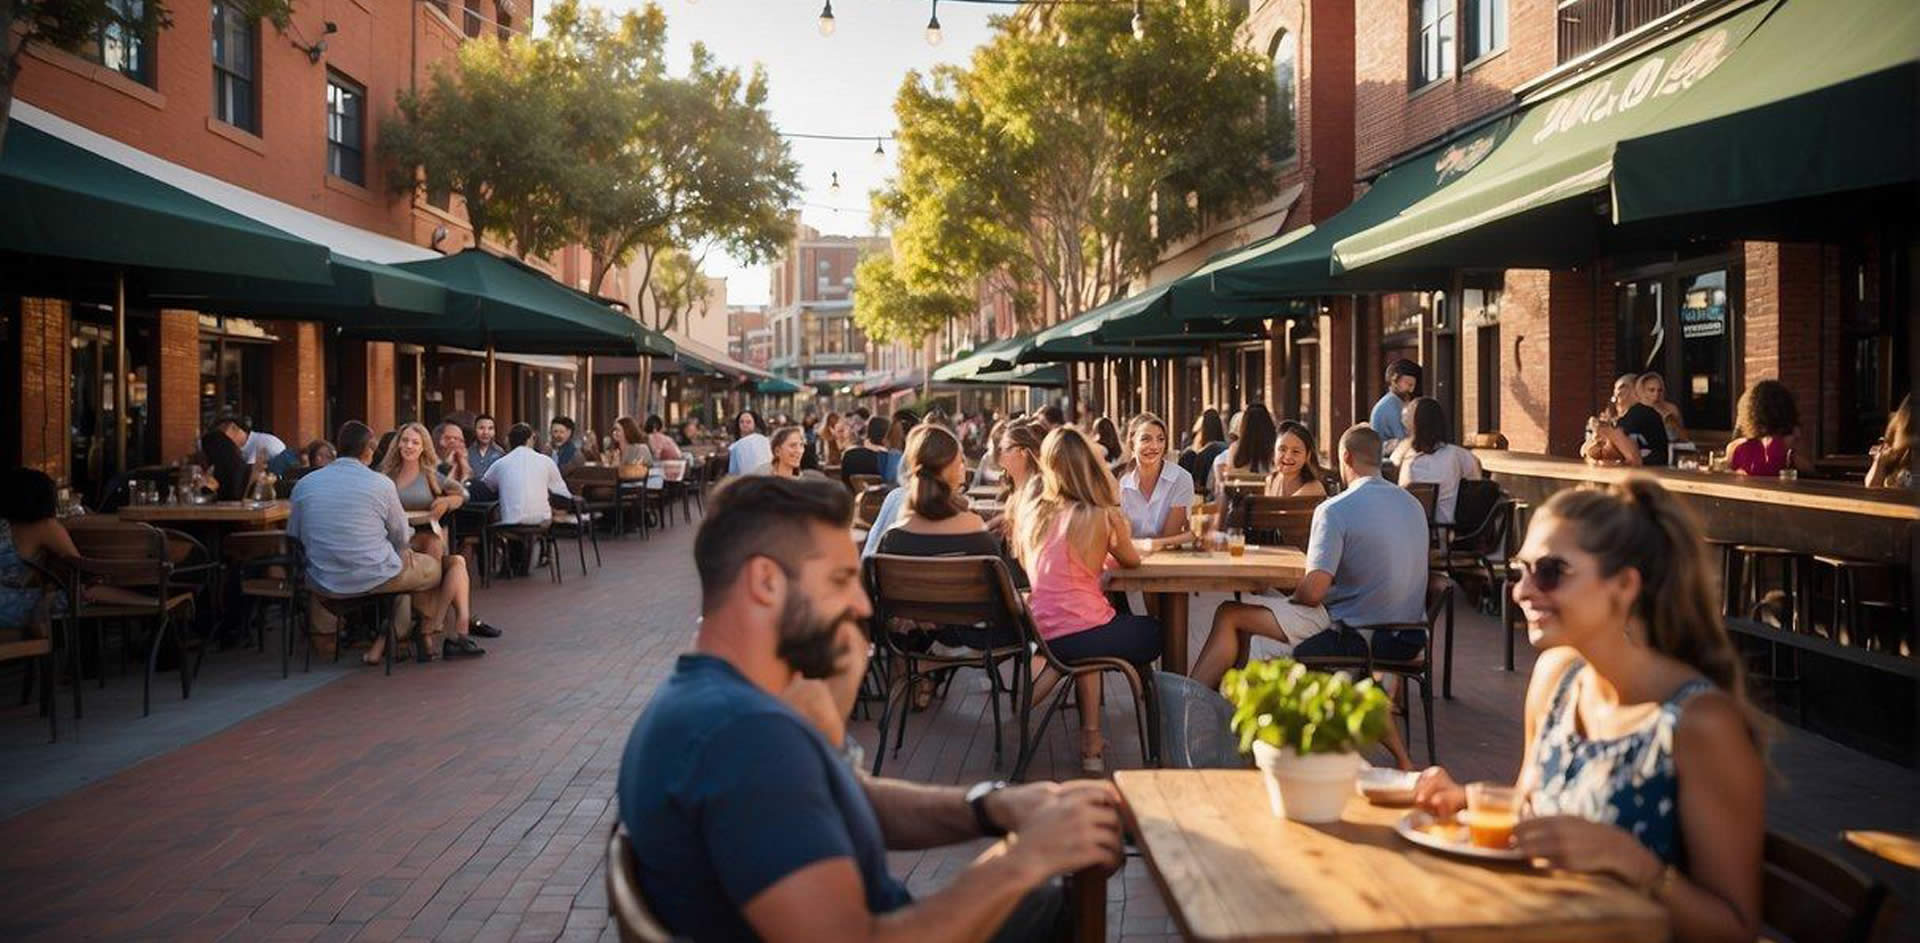 People enjoying outdoor activities in Gaslamp Quarter: dining at outdoor cafes, shopping at trendy boutiques, playing sports like basketball and volleyball, and attending live music and entertainment events